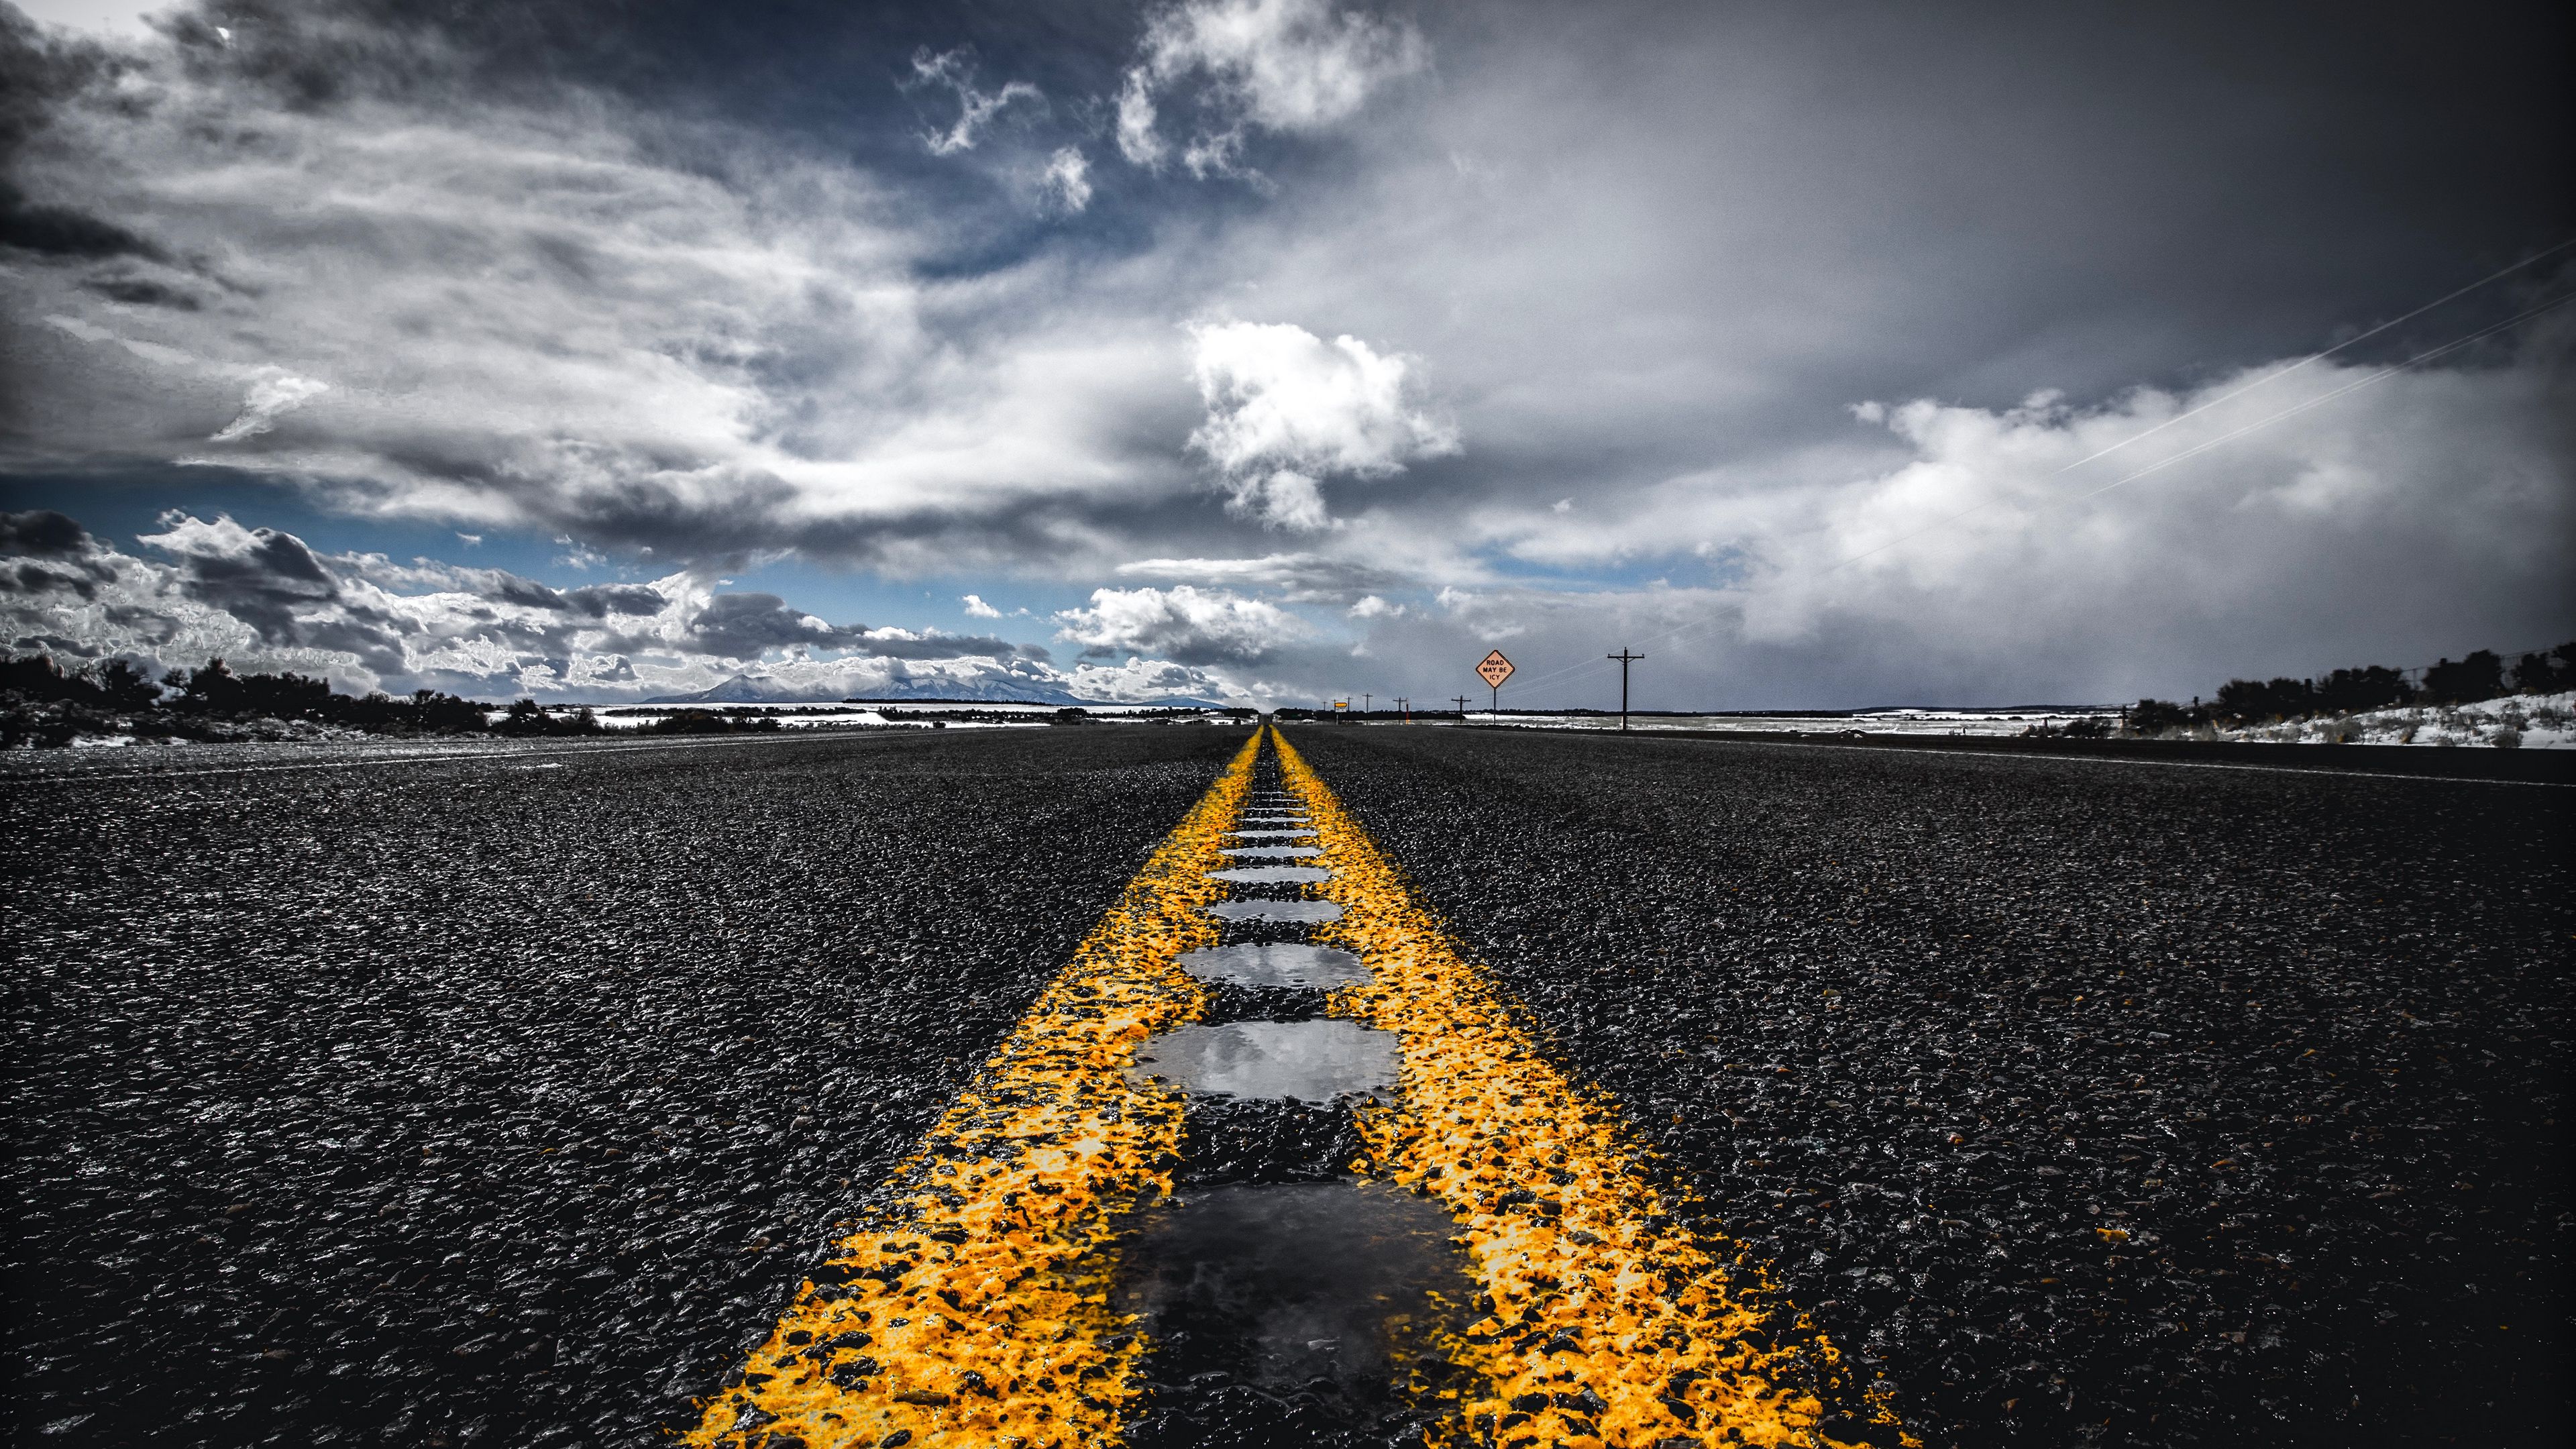 Effect road background images download